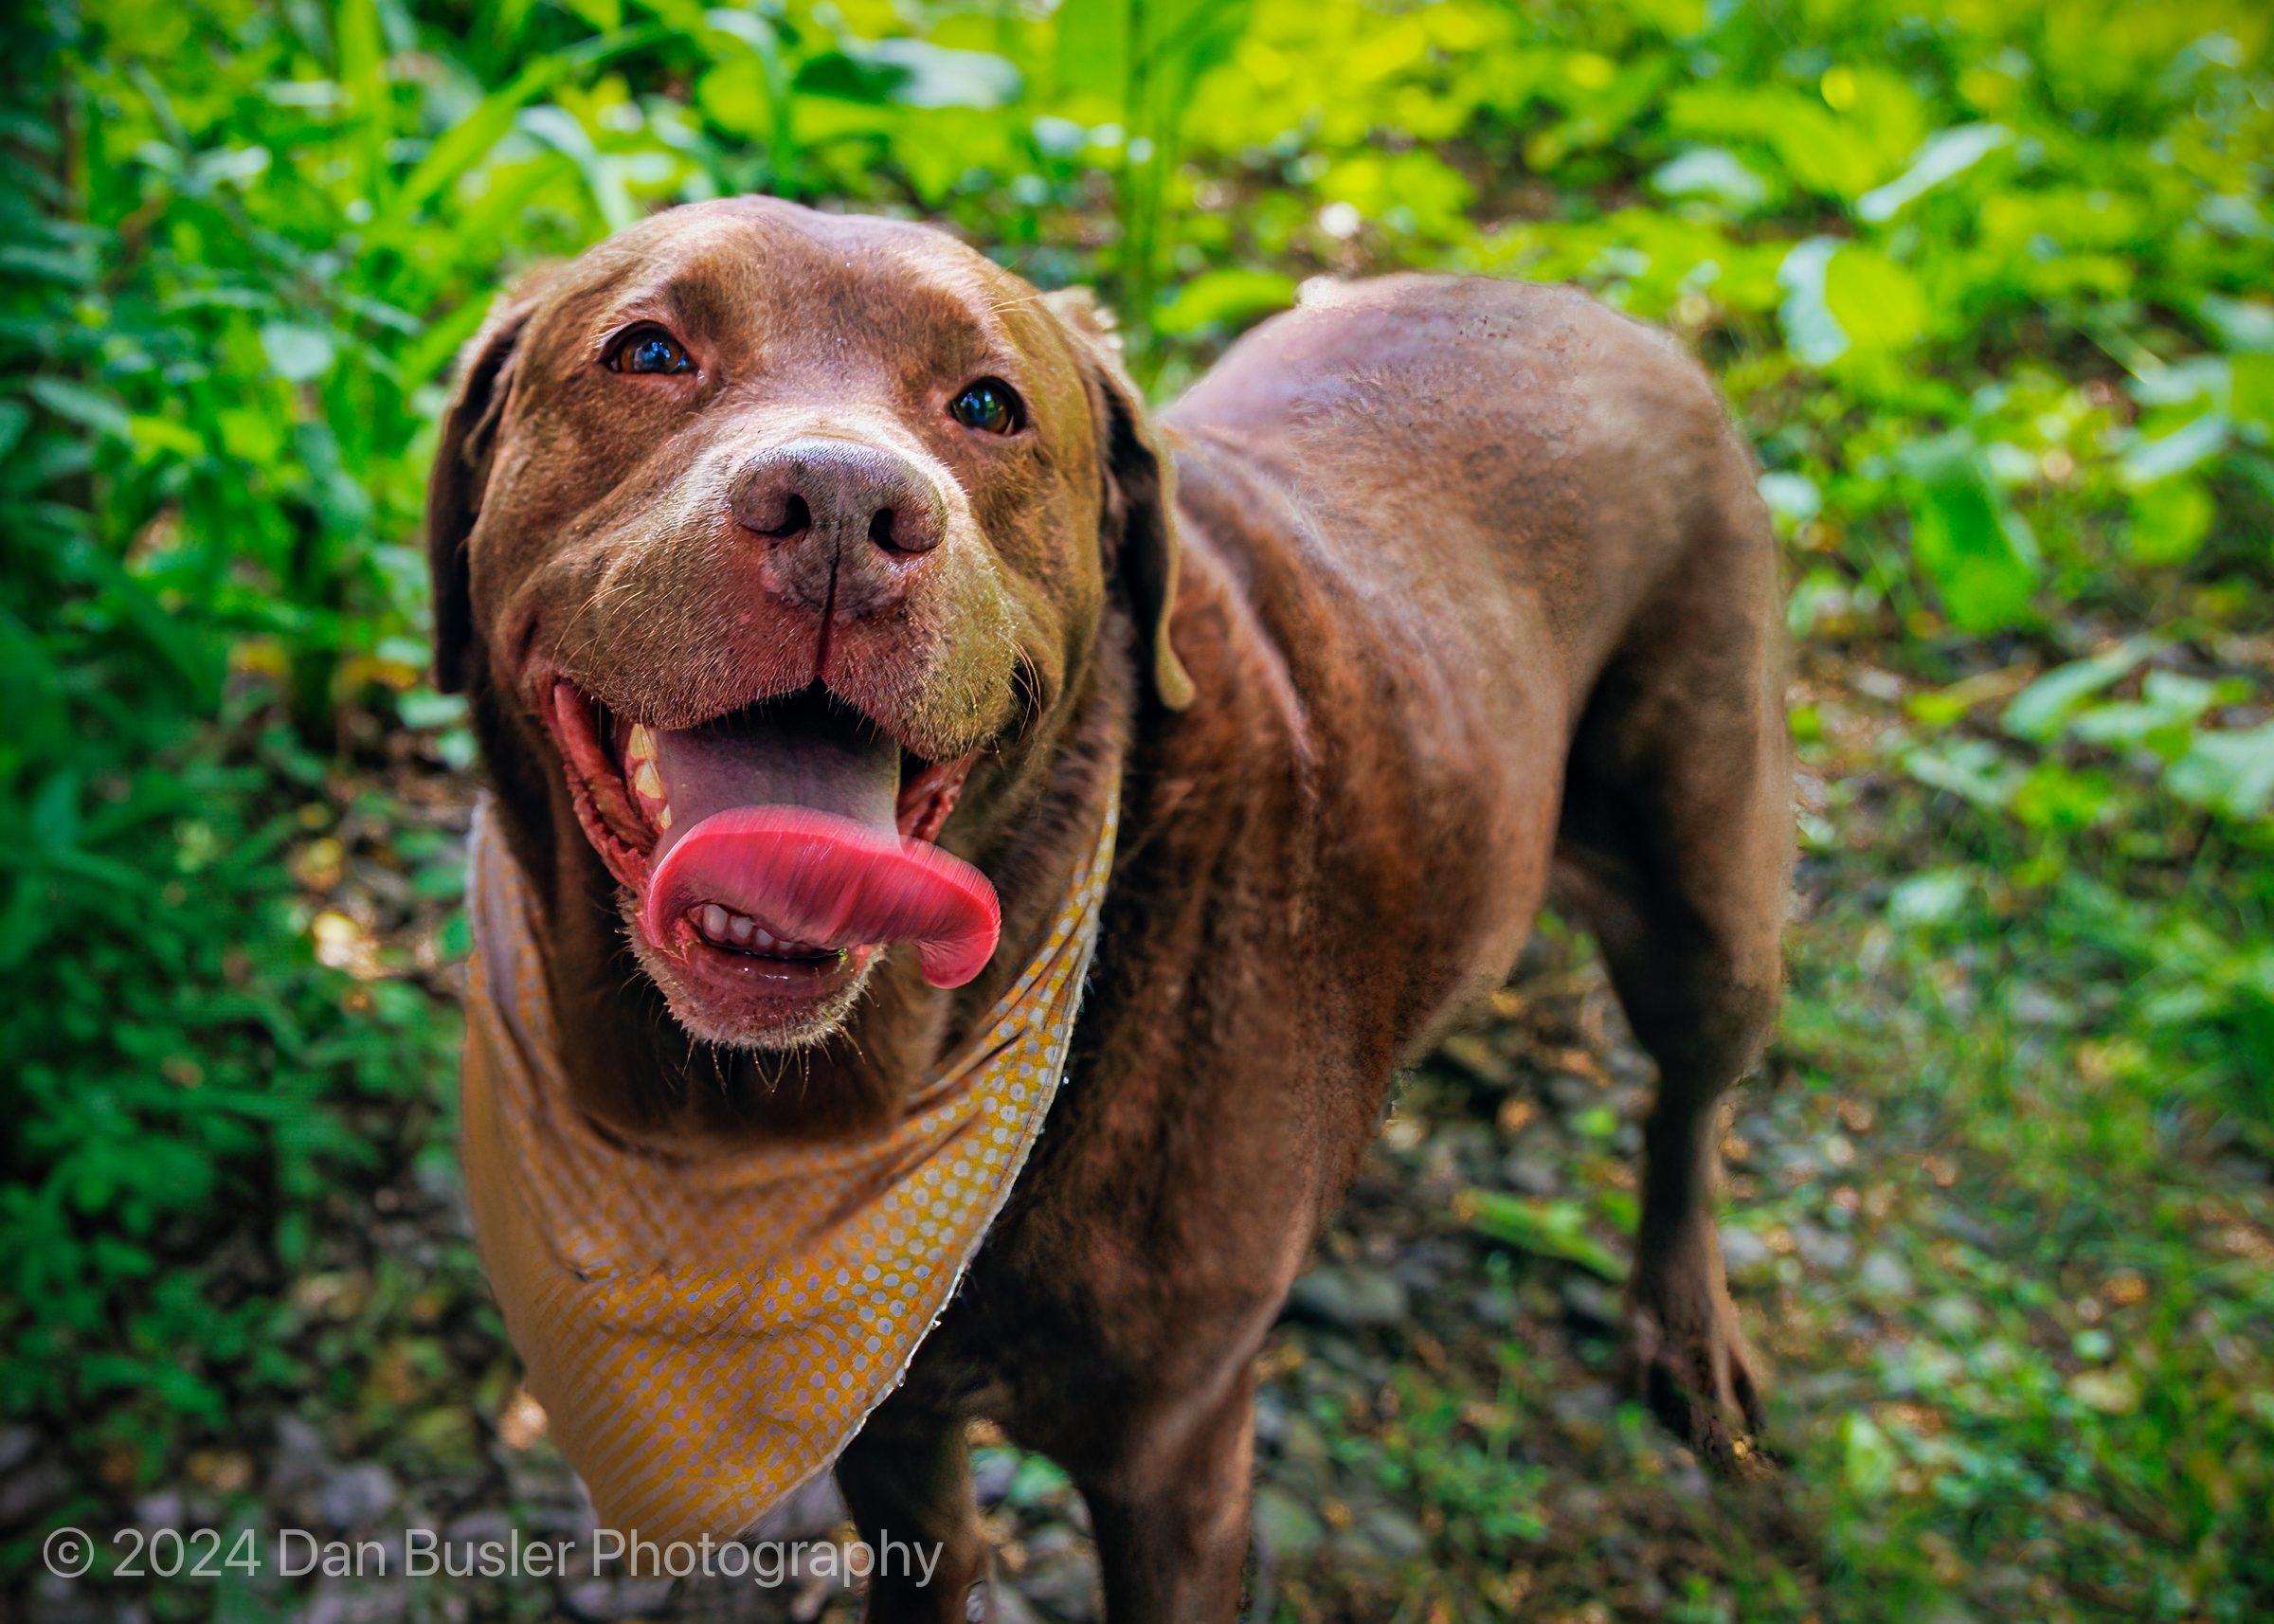 an image of a big brown female dog with bright eyes and it's tongue hanging out